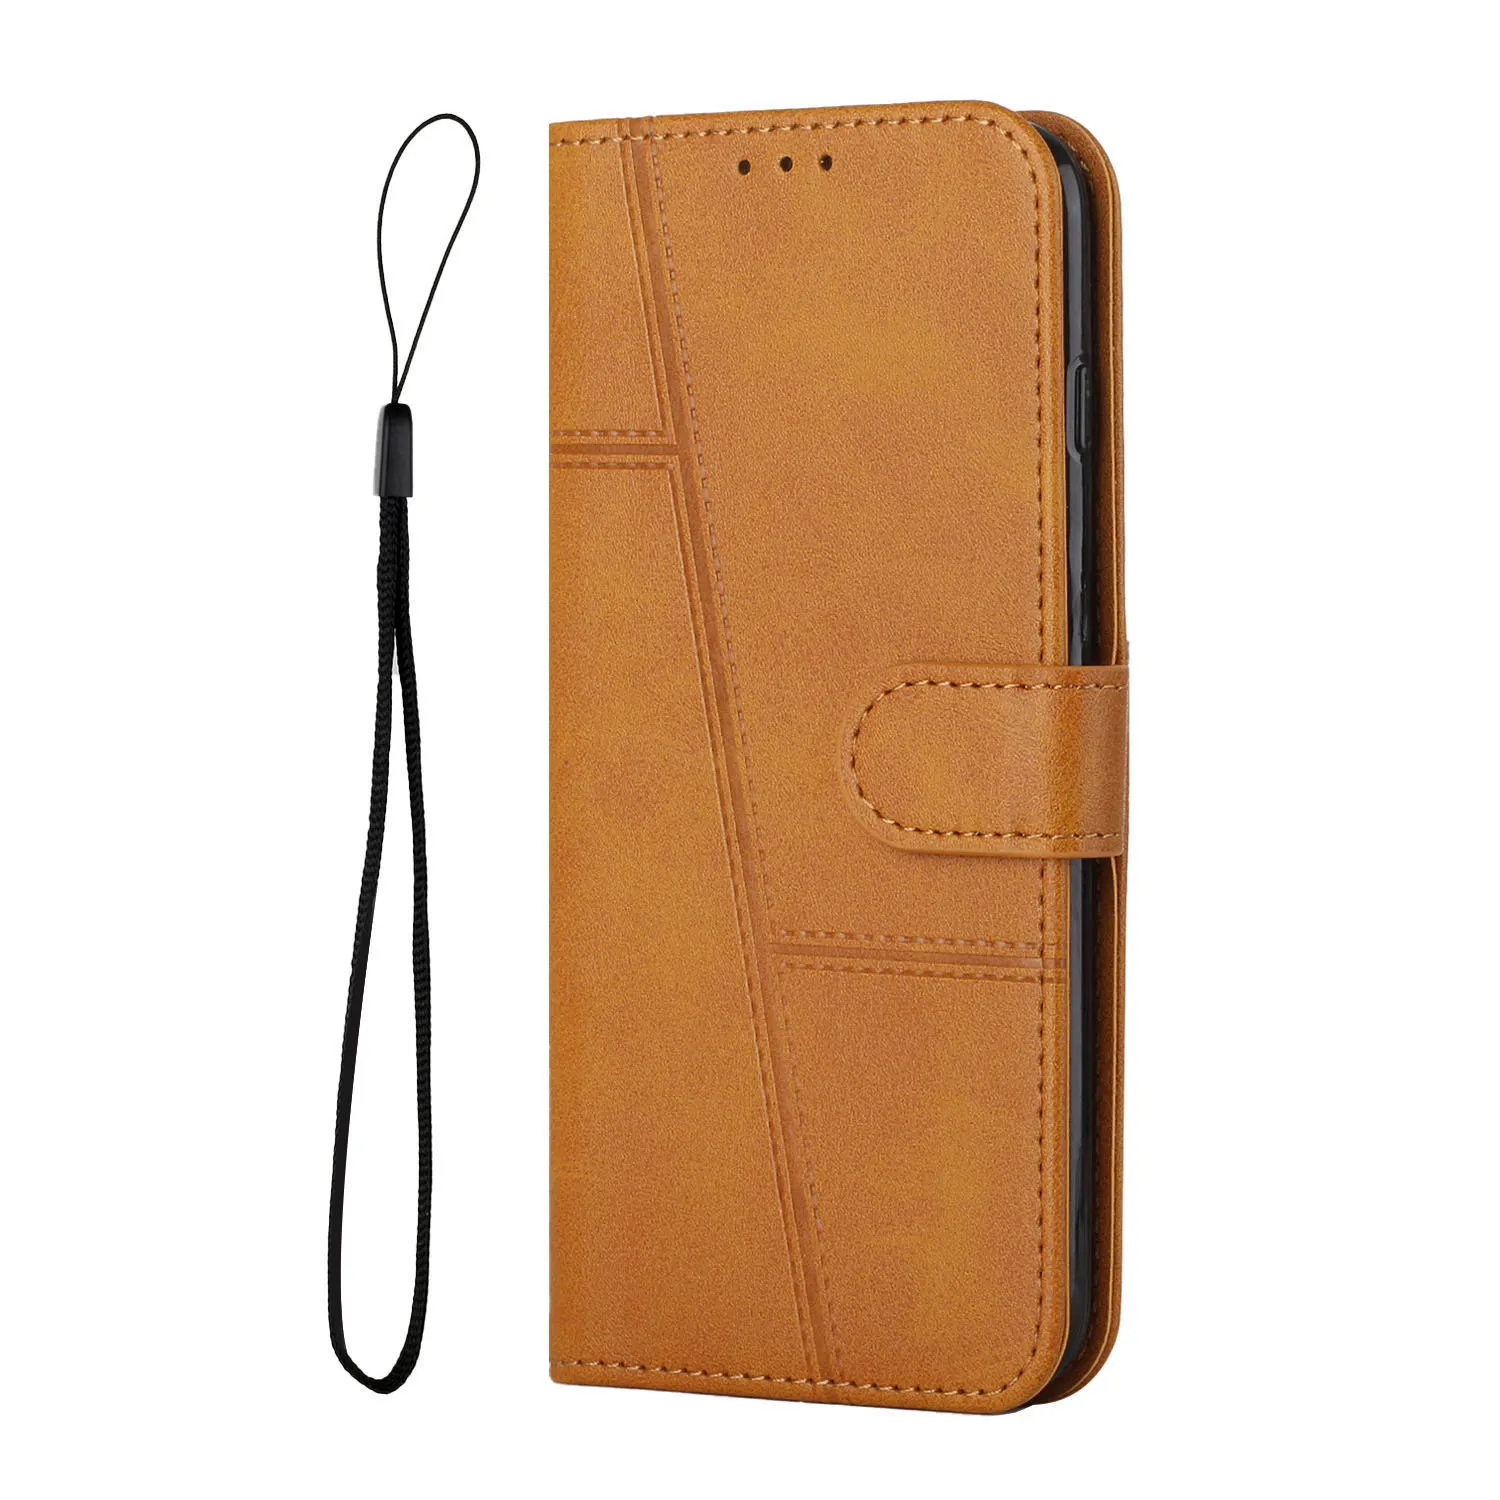 mobile phone pouch Card Holder Wallet Flip Case For Samsung Galaxy S22 S21 S20 A12 A22 A32 A42 A52 A52S A72 A13 A33 A53 A73 A03 Core Leather Cover iphone pouch with strap